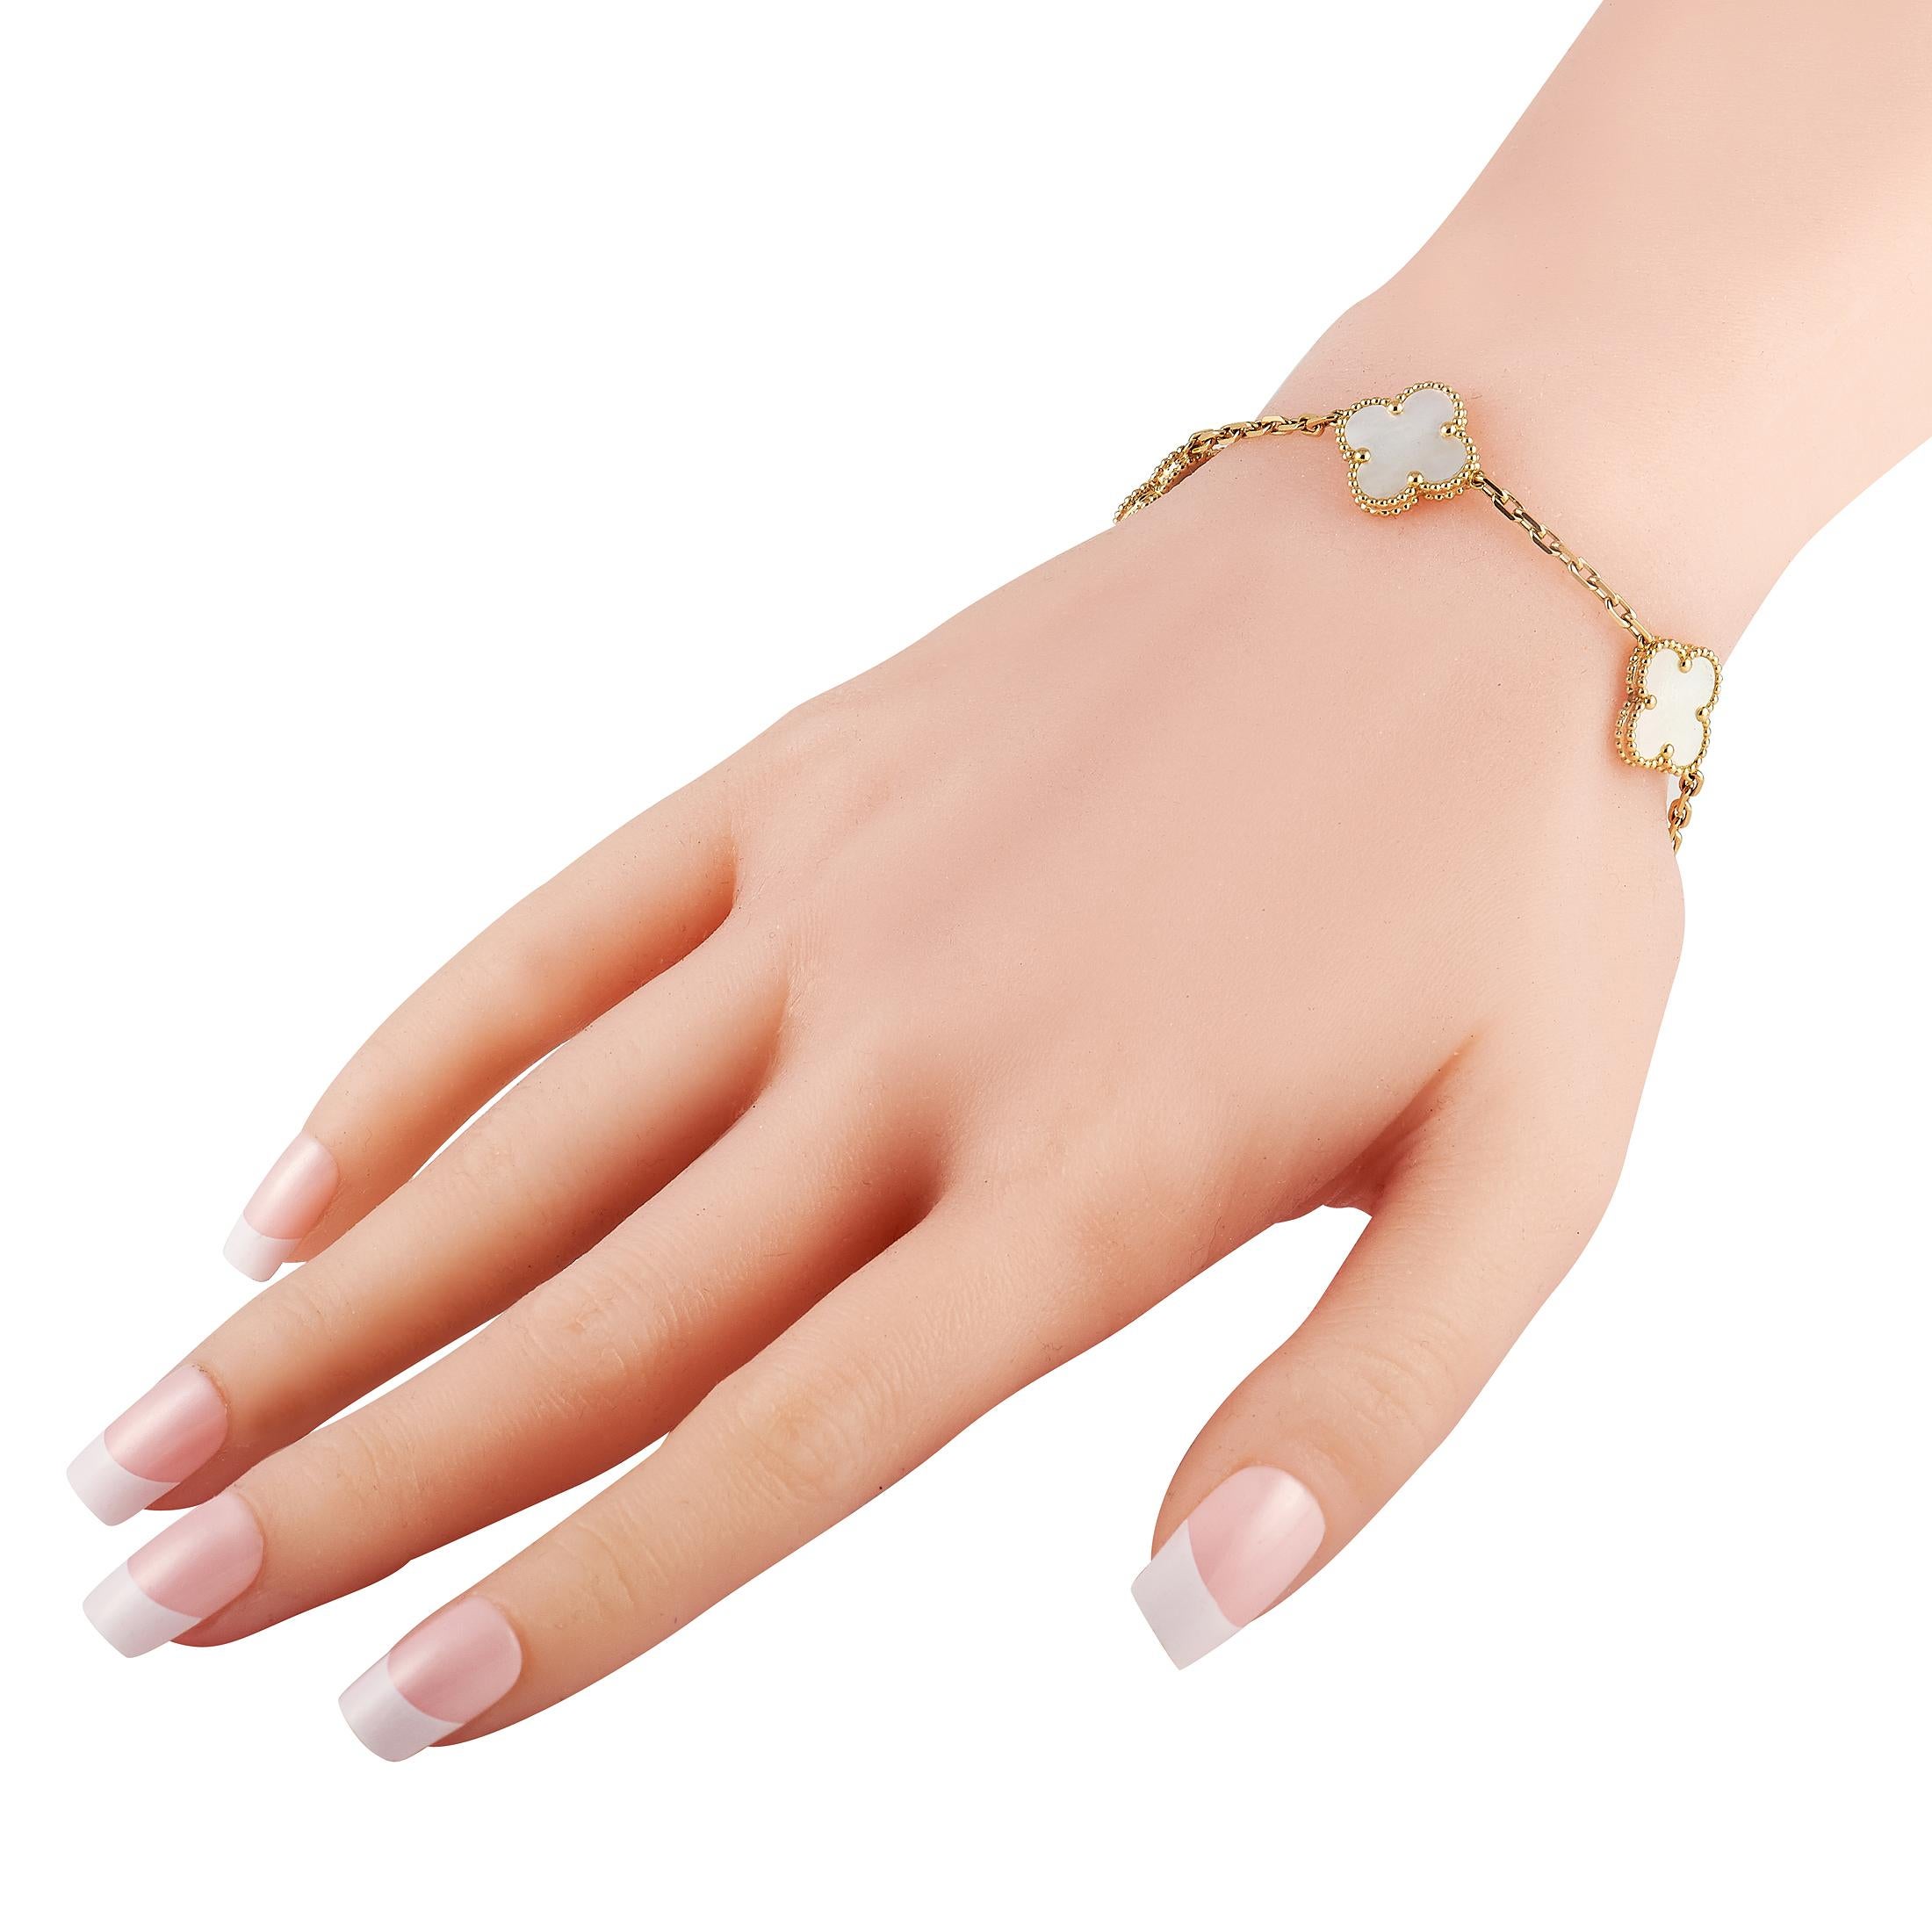 The iconic Van Cleef & Arpels clover motif makes a statement on this stylish luxury bracelet. Crafted from 18K Yellow Gold, glistening Mother of Pearl elevates the series of five Alhambra accents on this 7.75